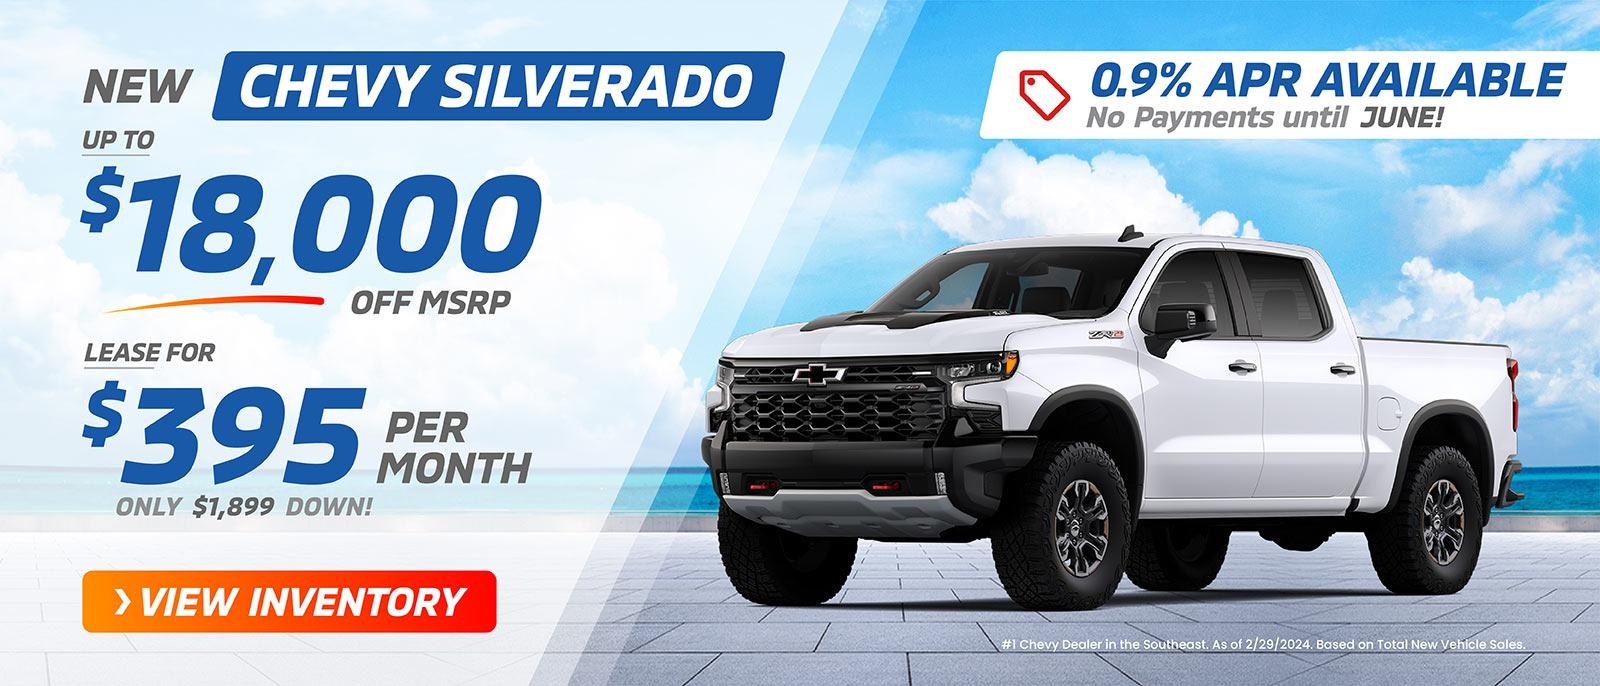 New Chevy Silverado
UP TO $14,500 OFF MSRP
FINANCING AT 0% APR AVAILABLE